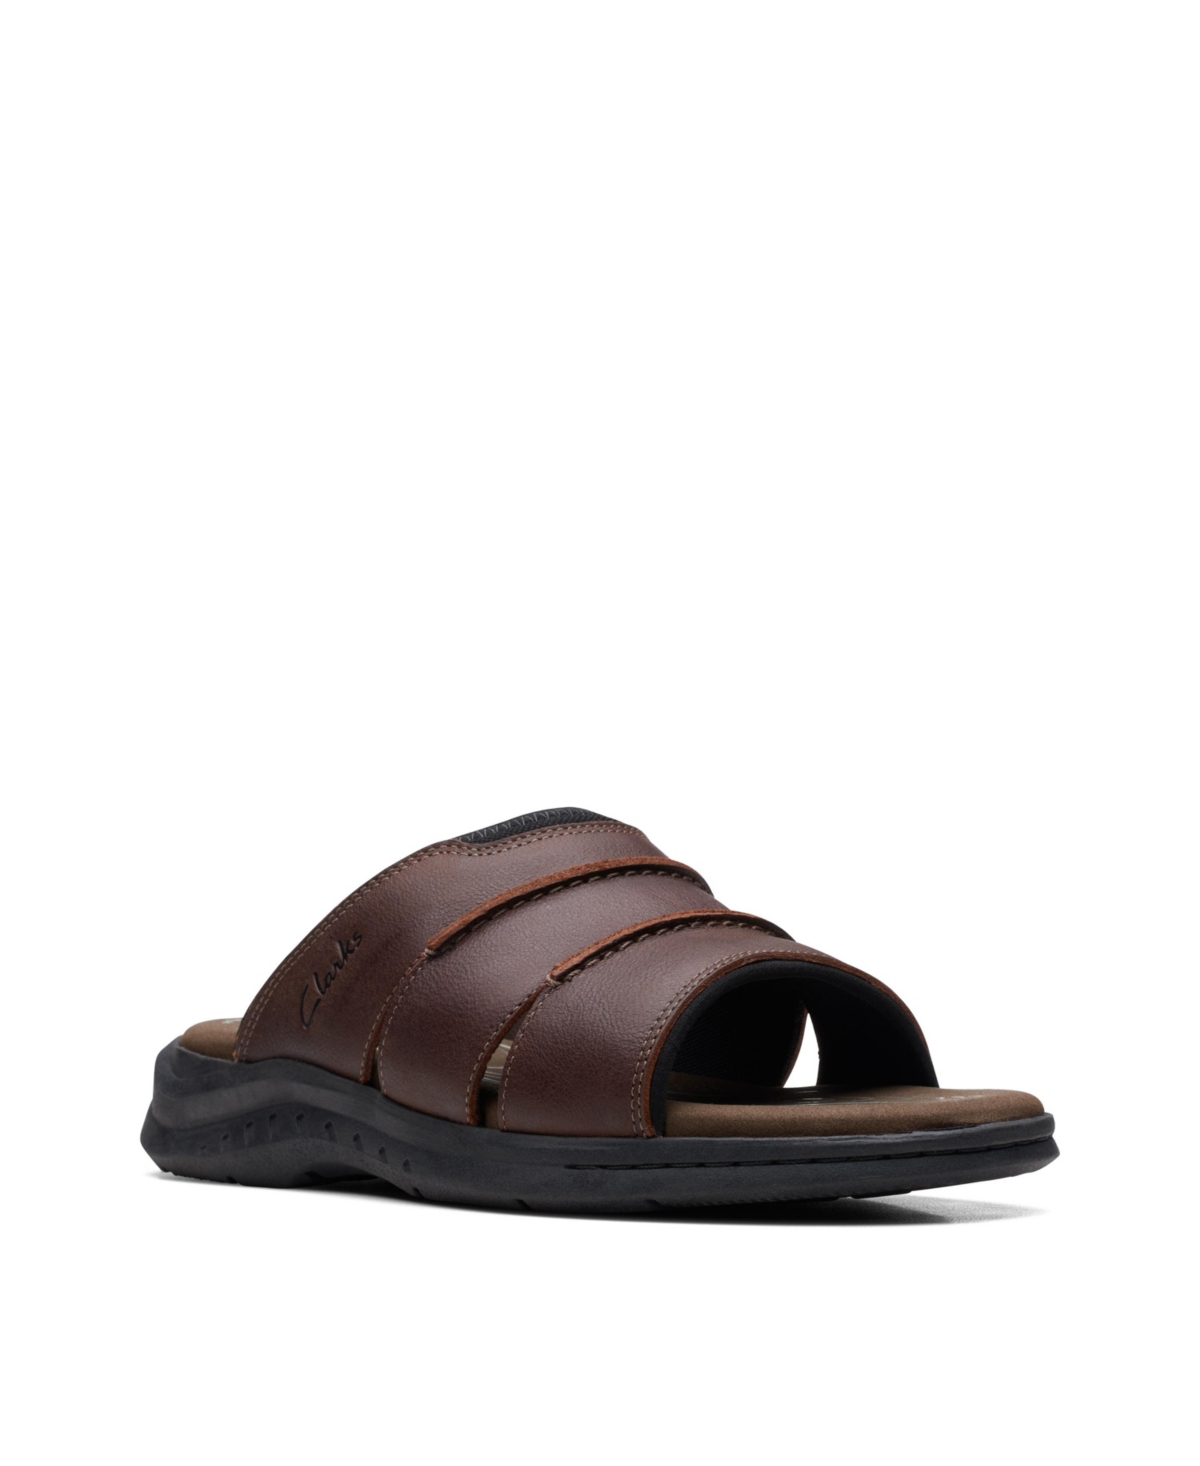 Men's Leather Walkford Easy Slide Sandals - Brown Tumbled Leather